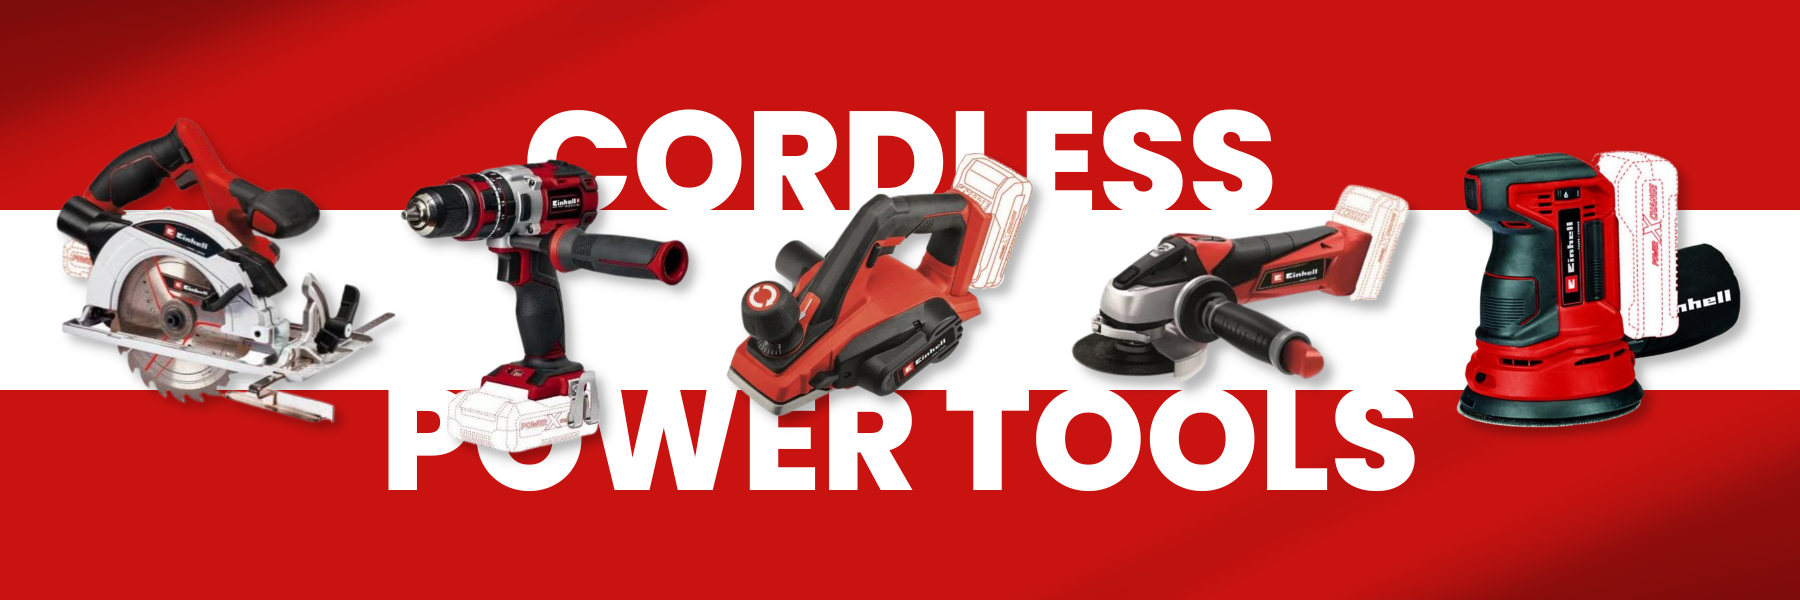 6 Einhell Cordless Power Tools For DIY South Africans